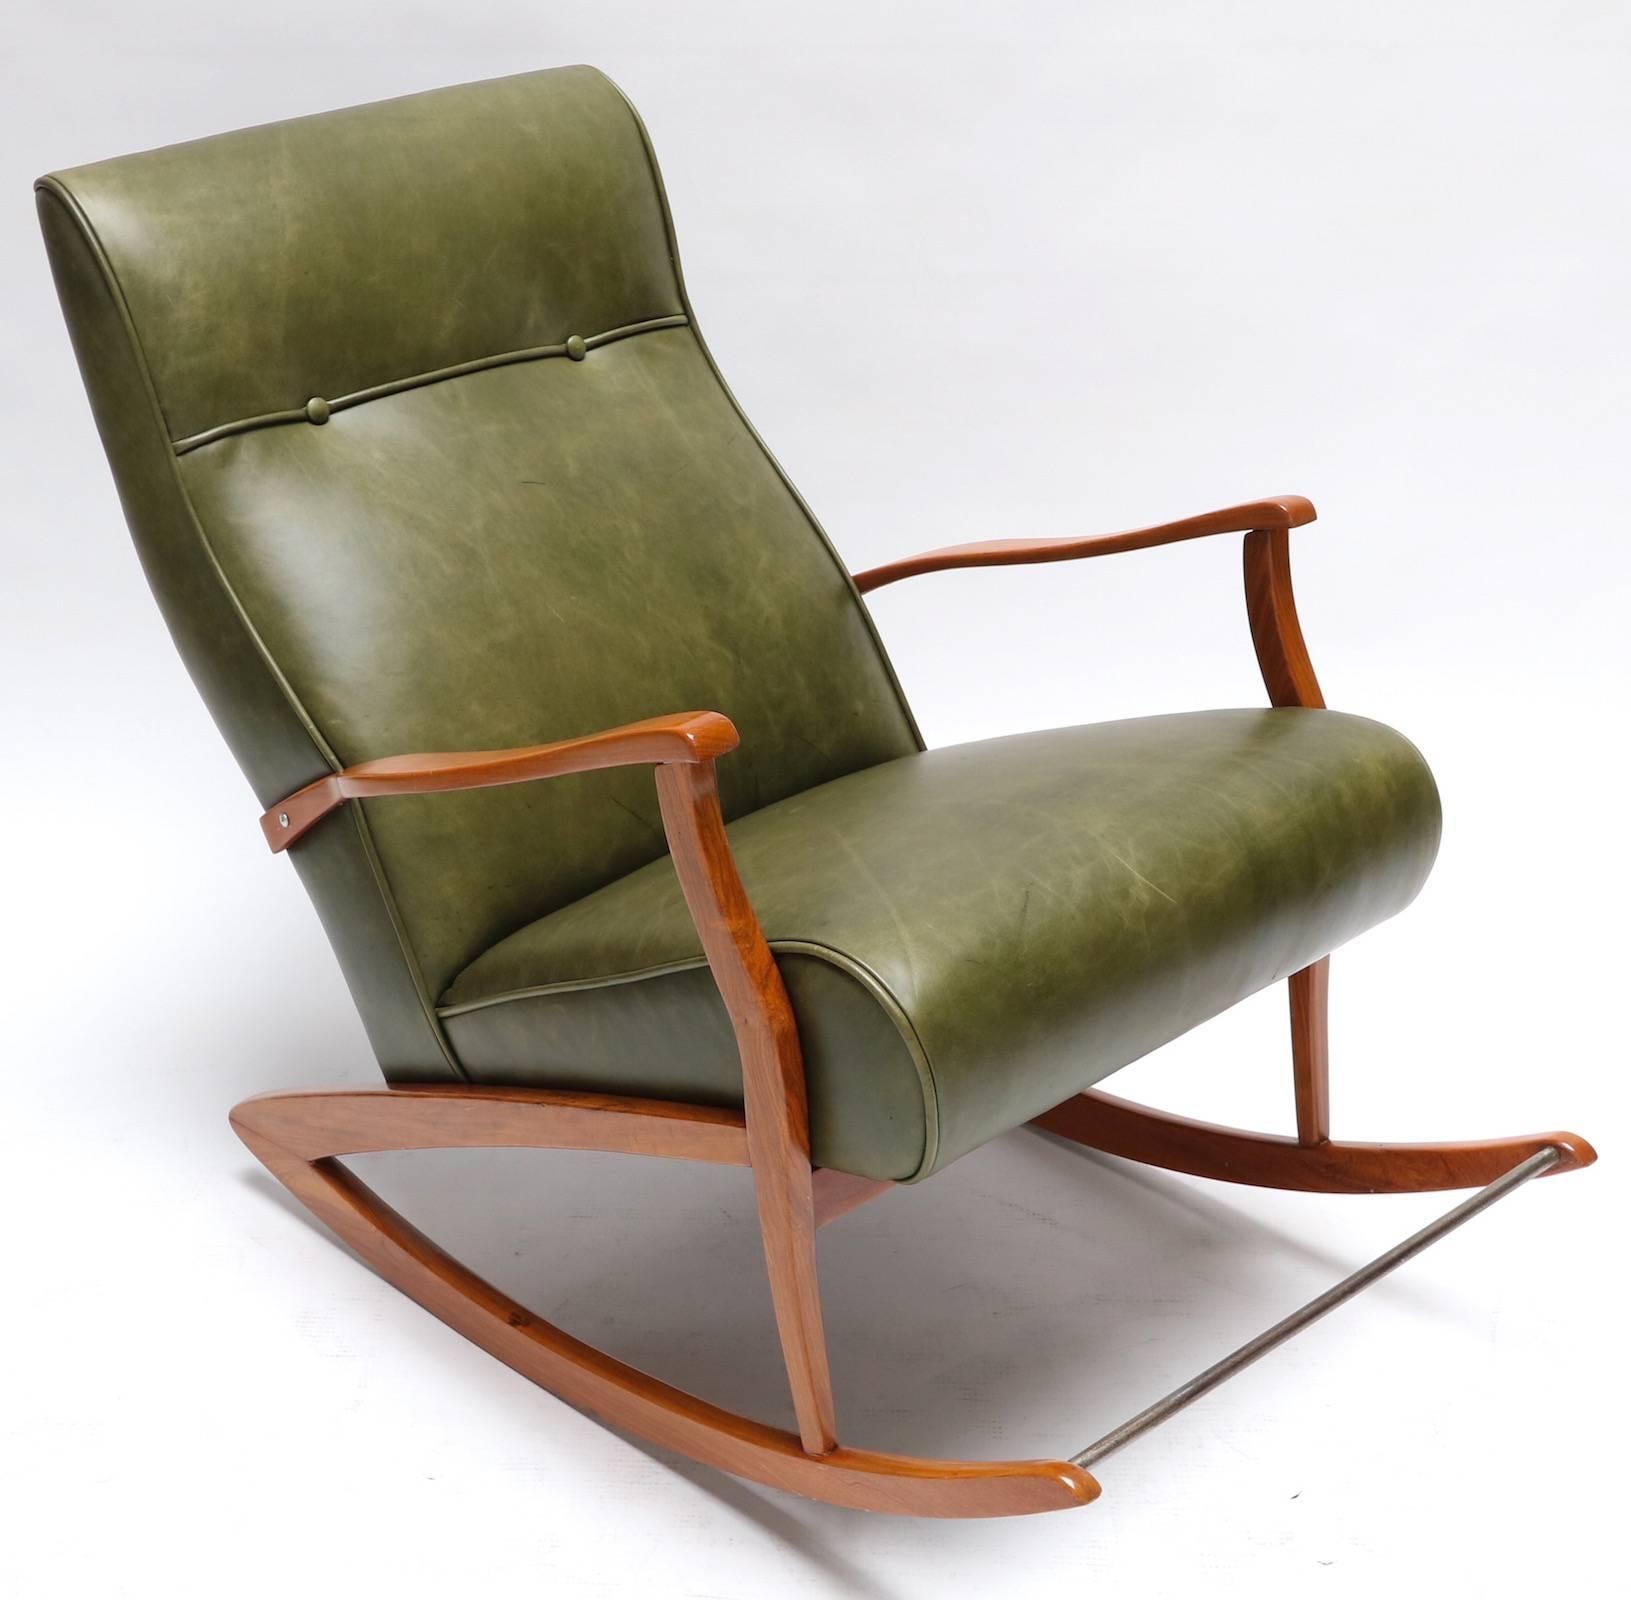 1960s Brazilian wooden rocking chair upholstered in green leather.